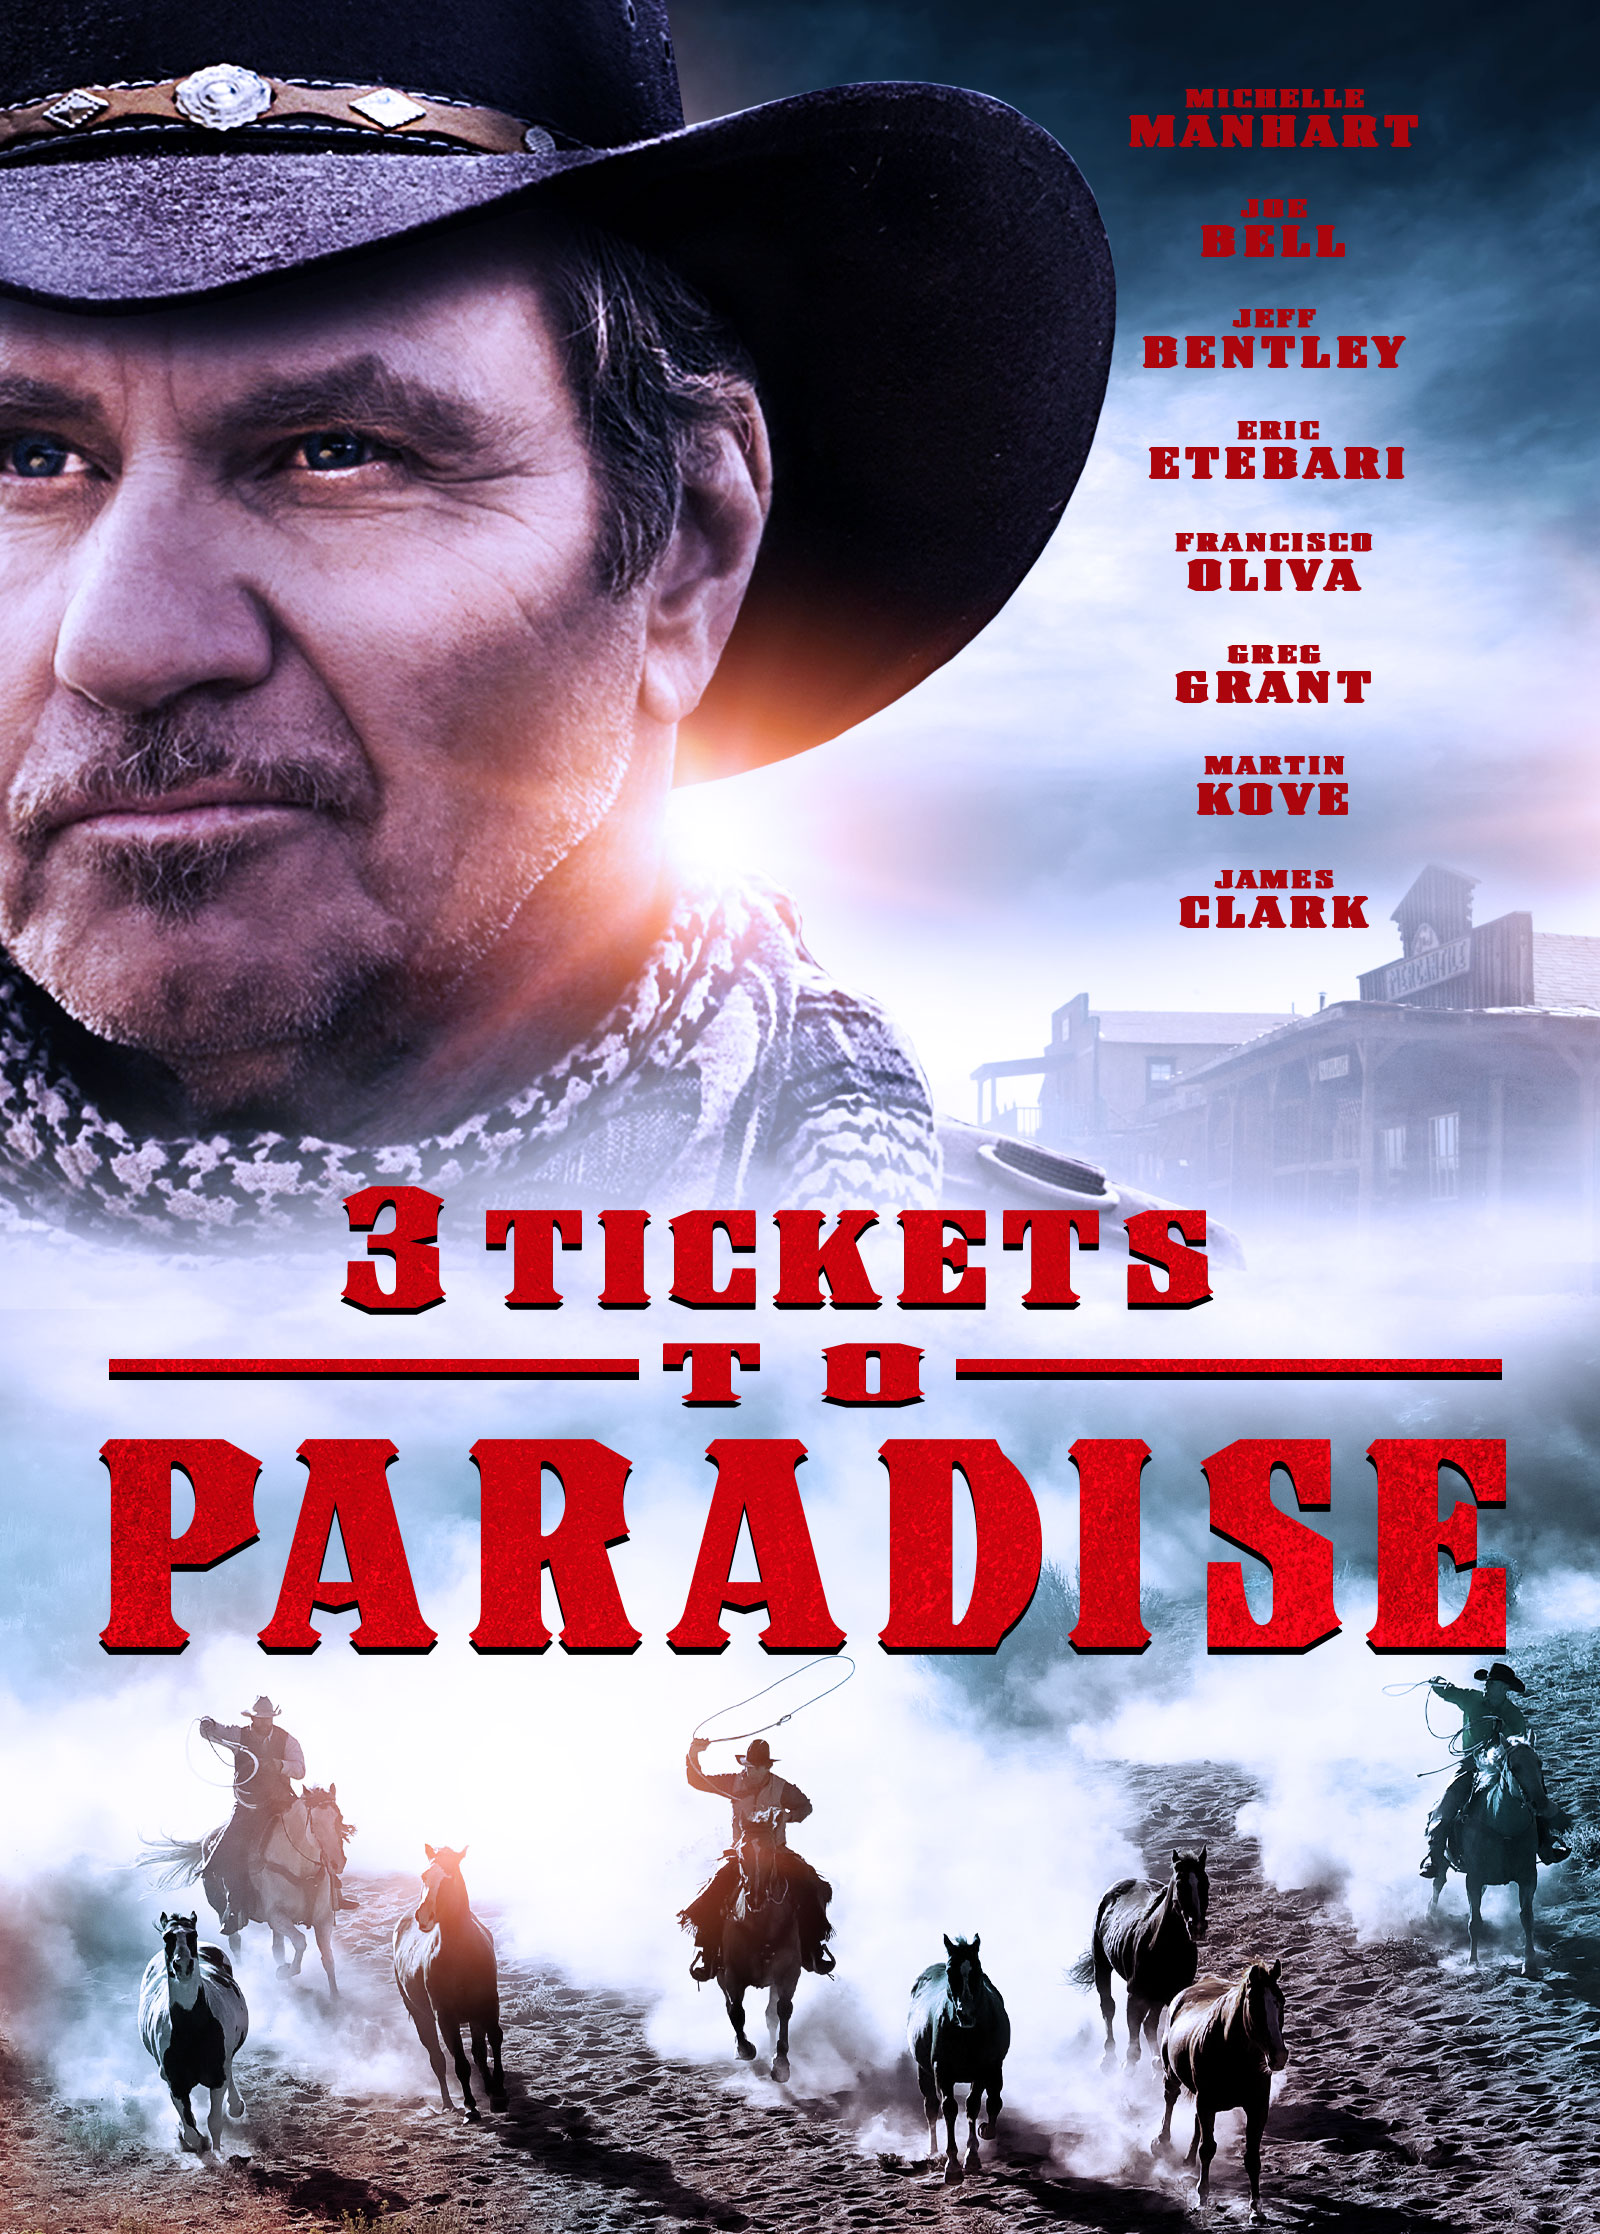 3 Tickets to Paradise (2018)